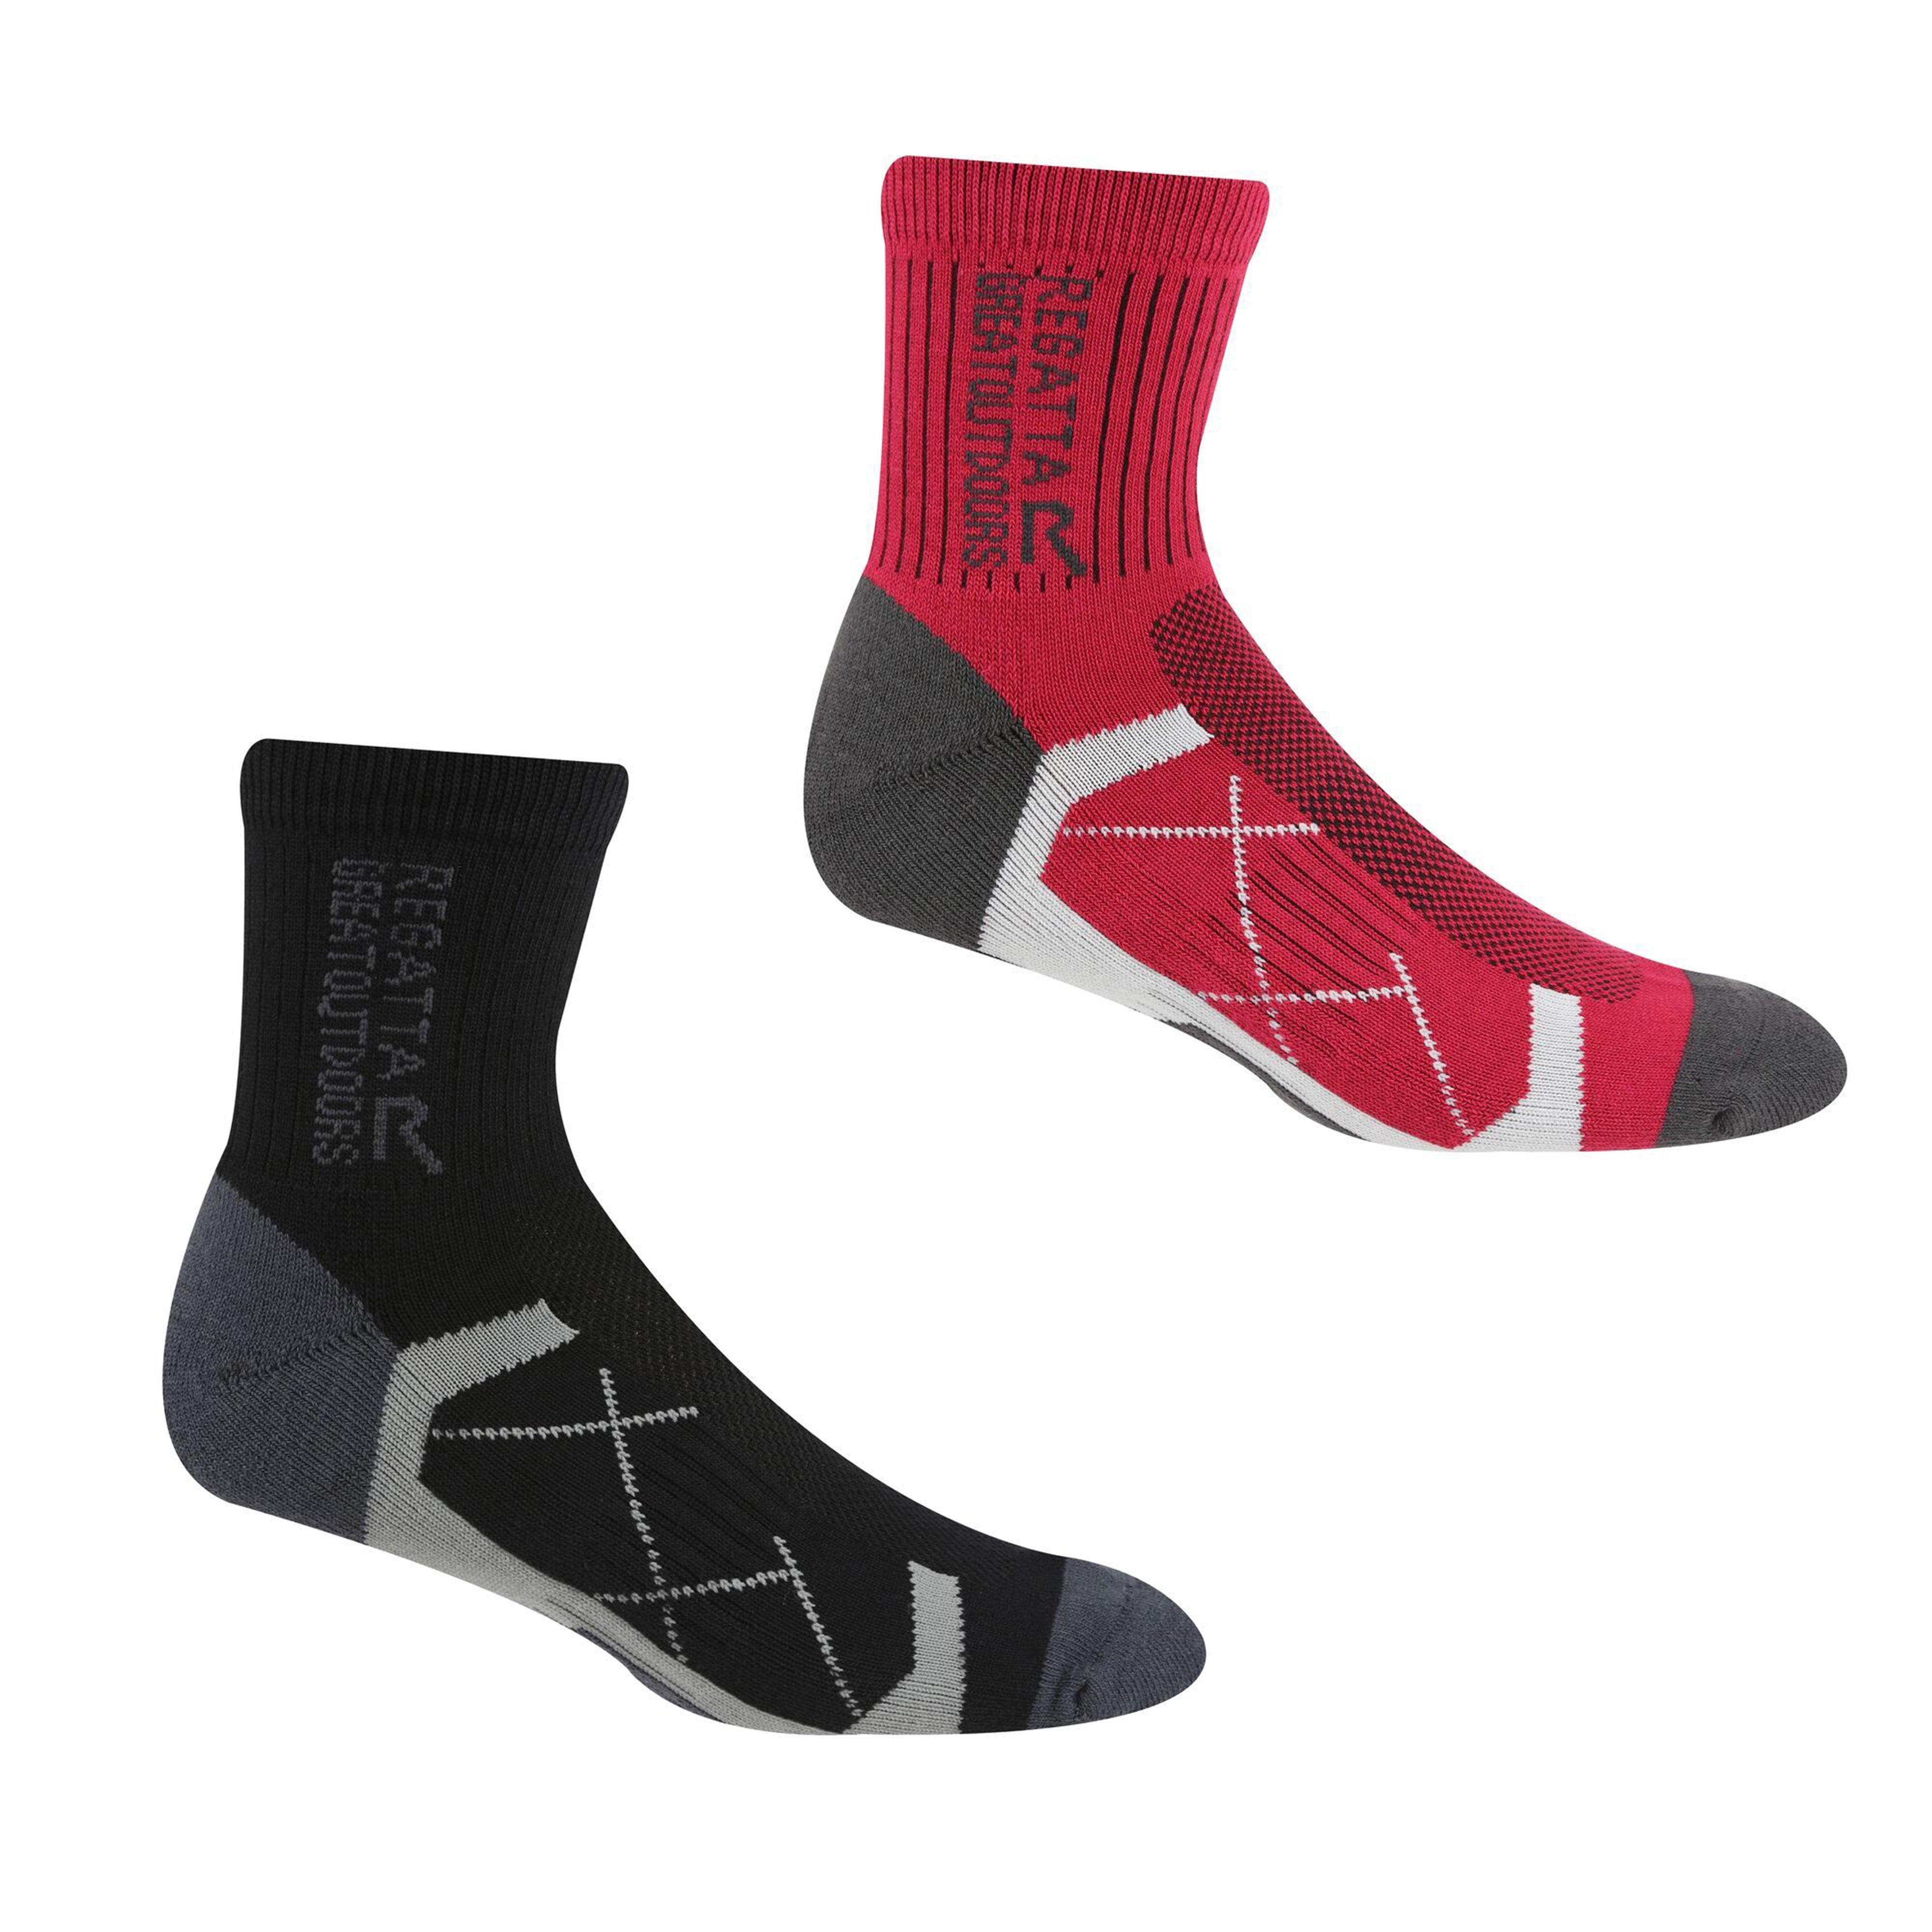 Womens Outdoor Active Socks 2 Pack Black/Cherry Pink